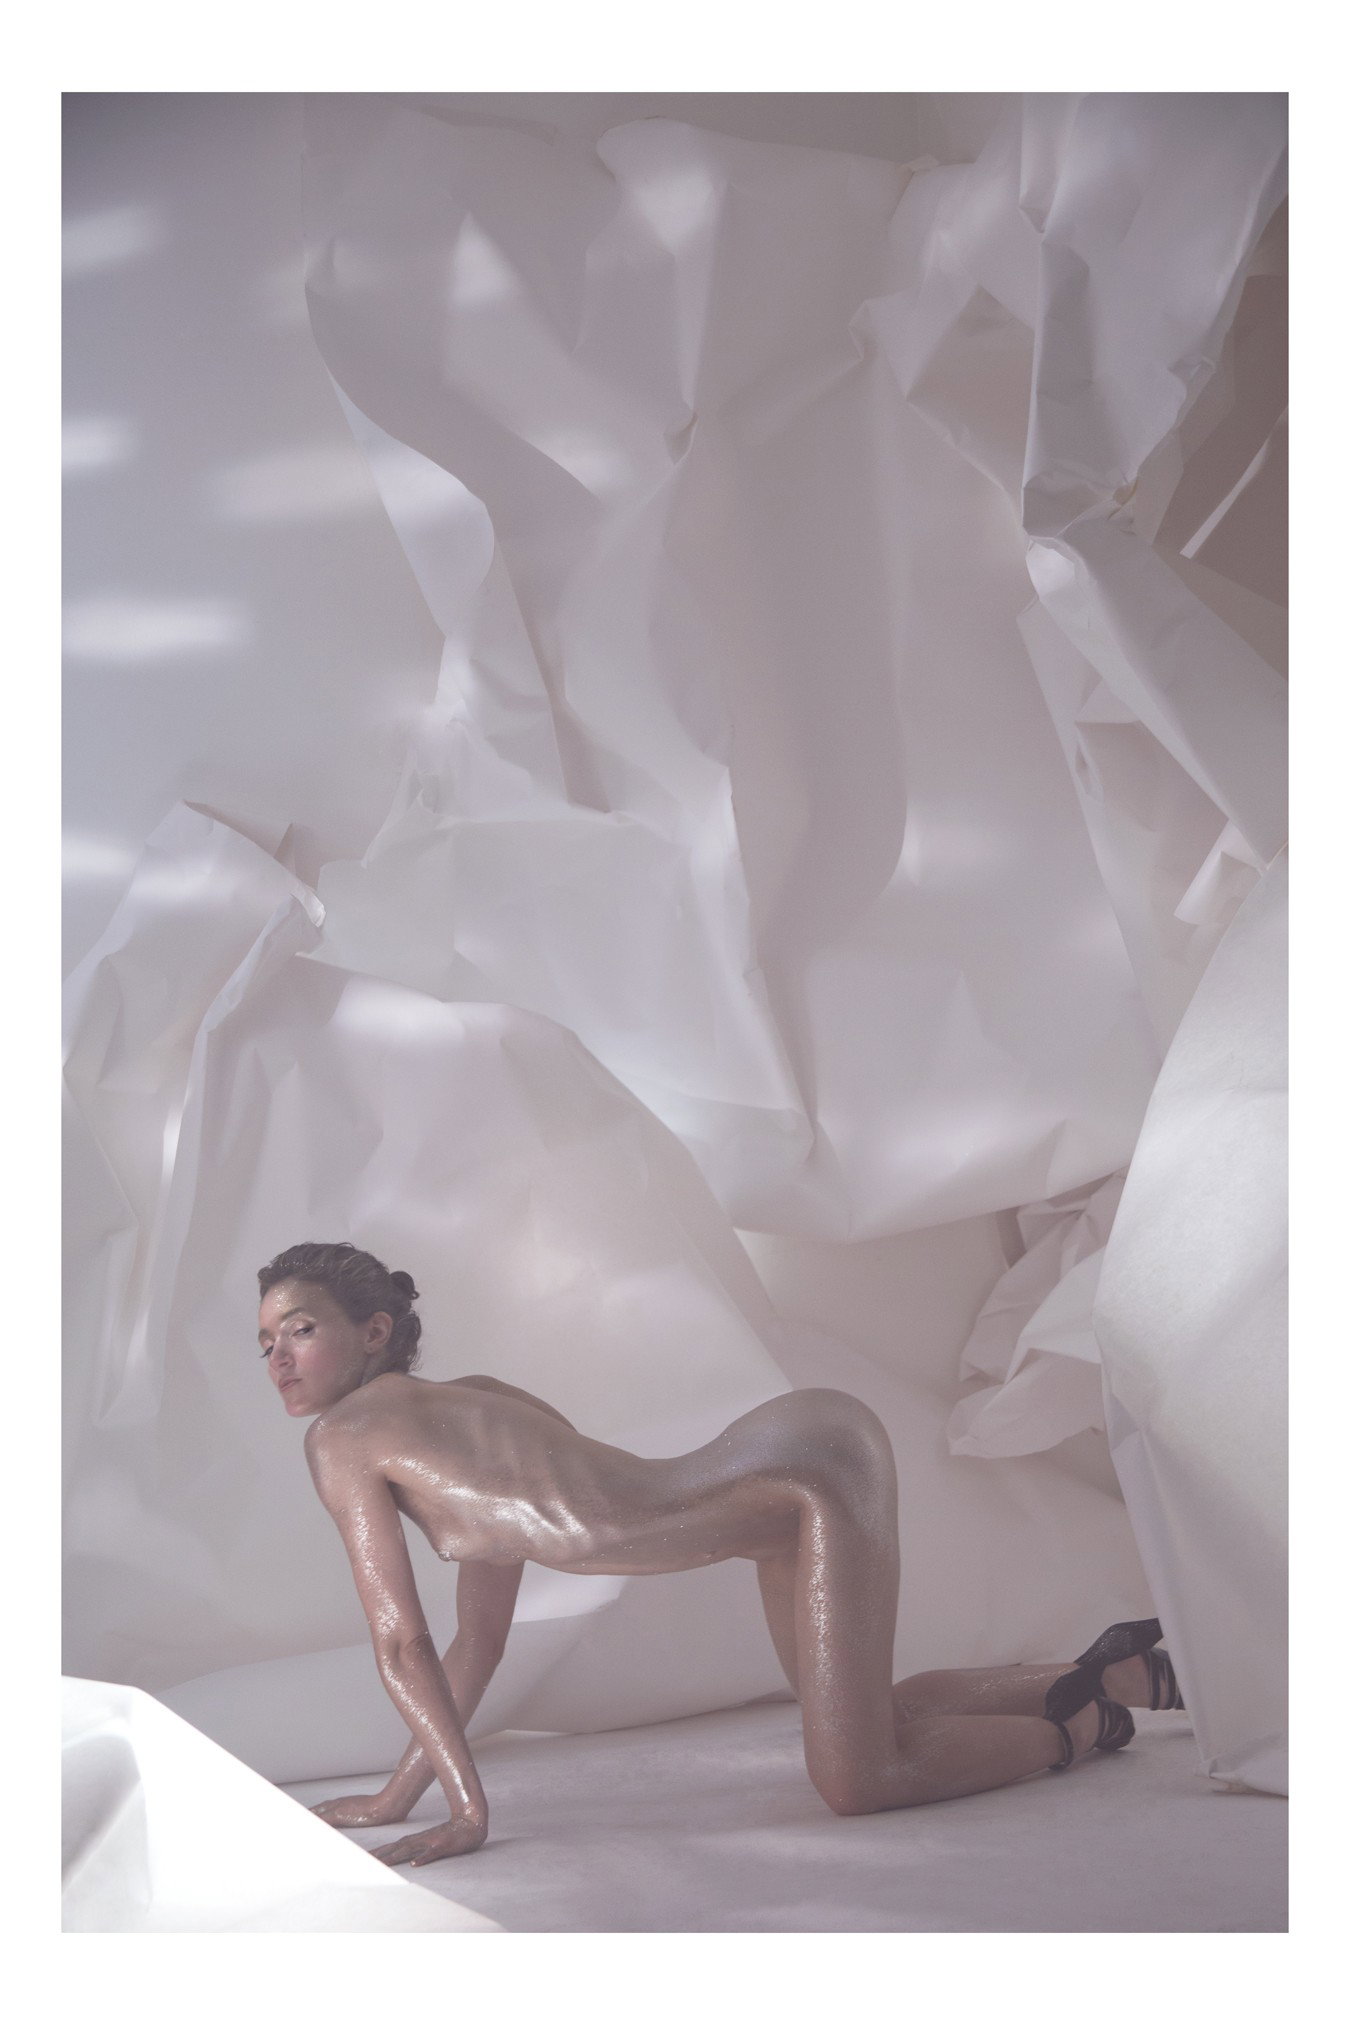 Photo by PureForm with the username @PureForm,  January 23, 2018 at 6:55 PM and the text says 'elle-aussi:

Geode - 2014 #Monsieurtok  #elearage  #glitter  #nude  #gold  #paper'